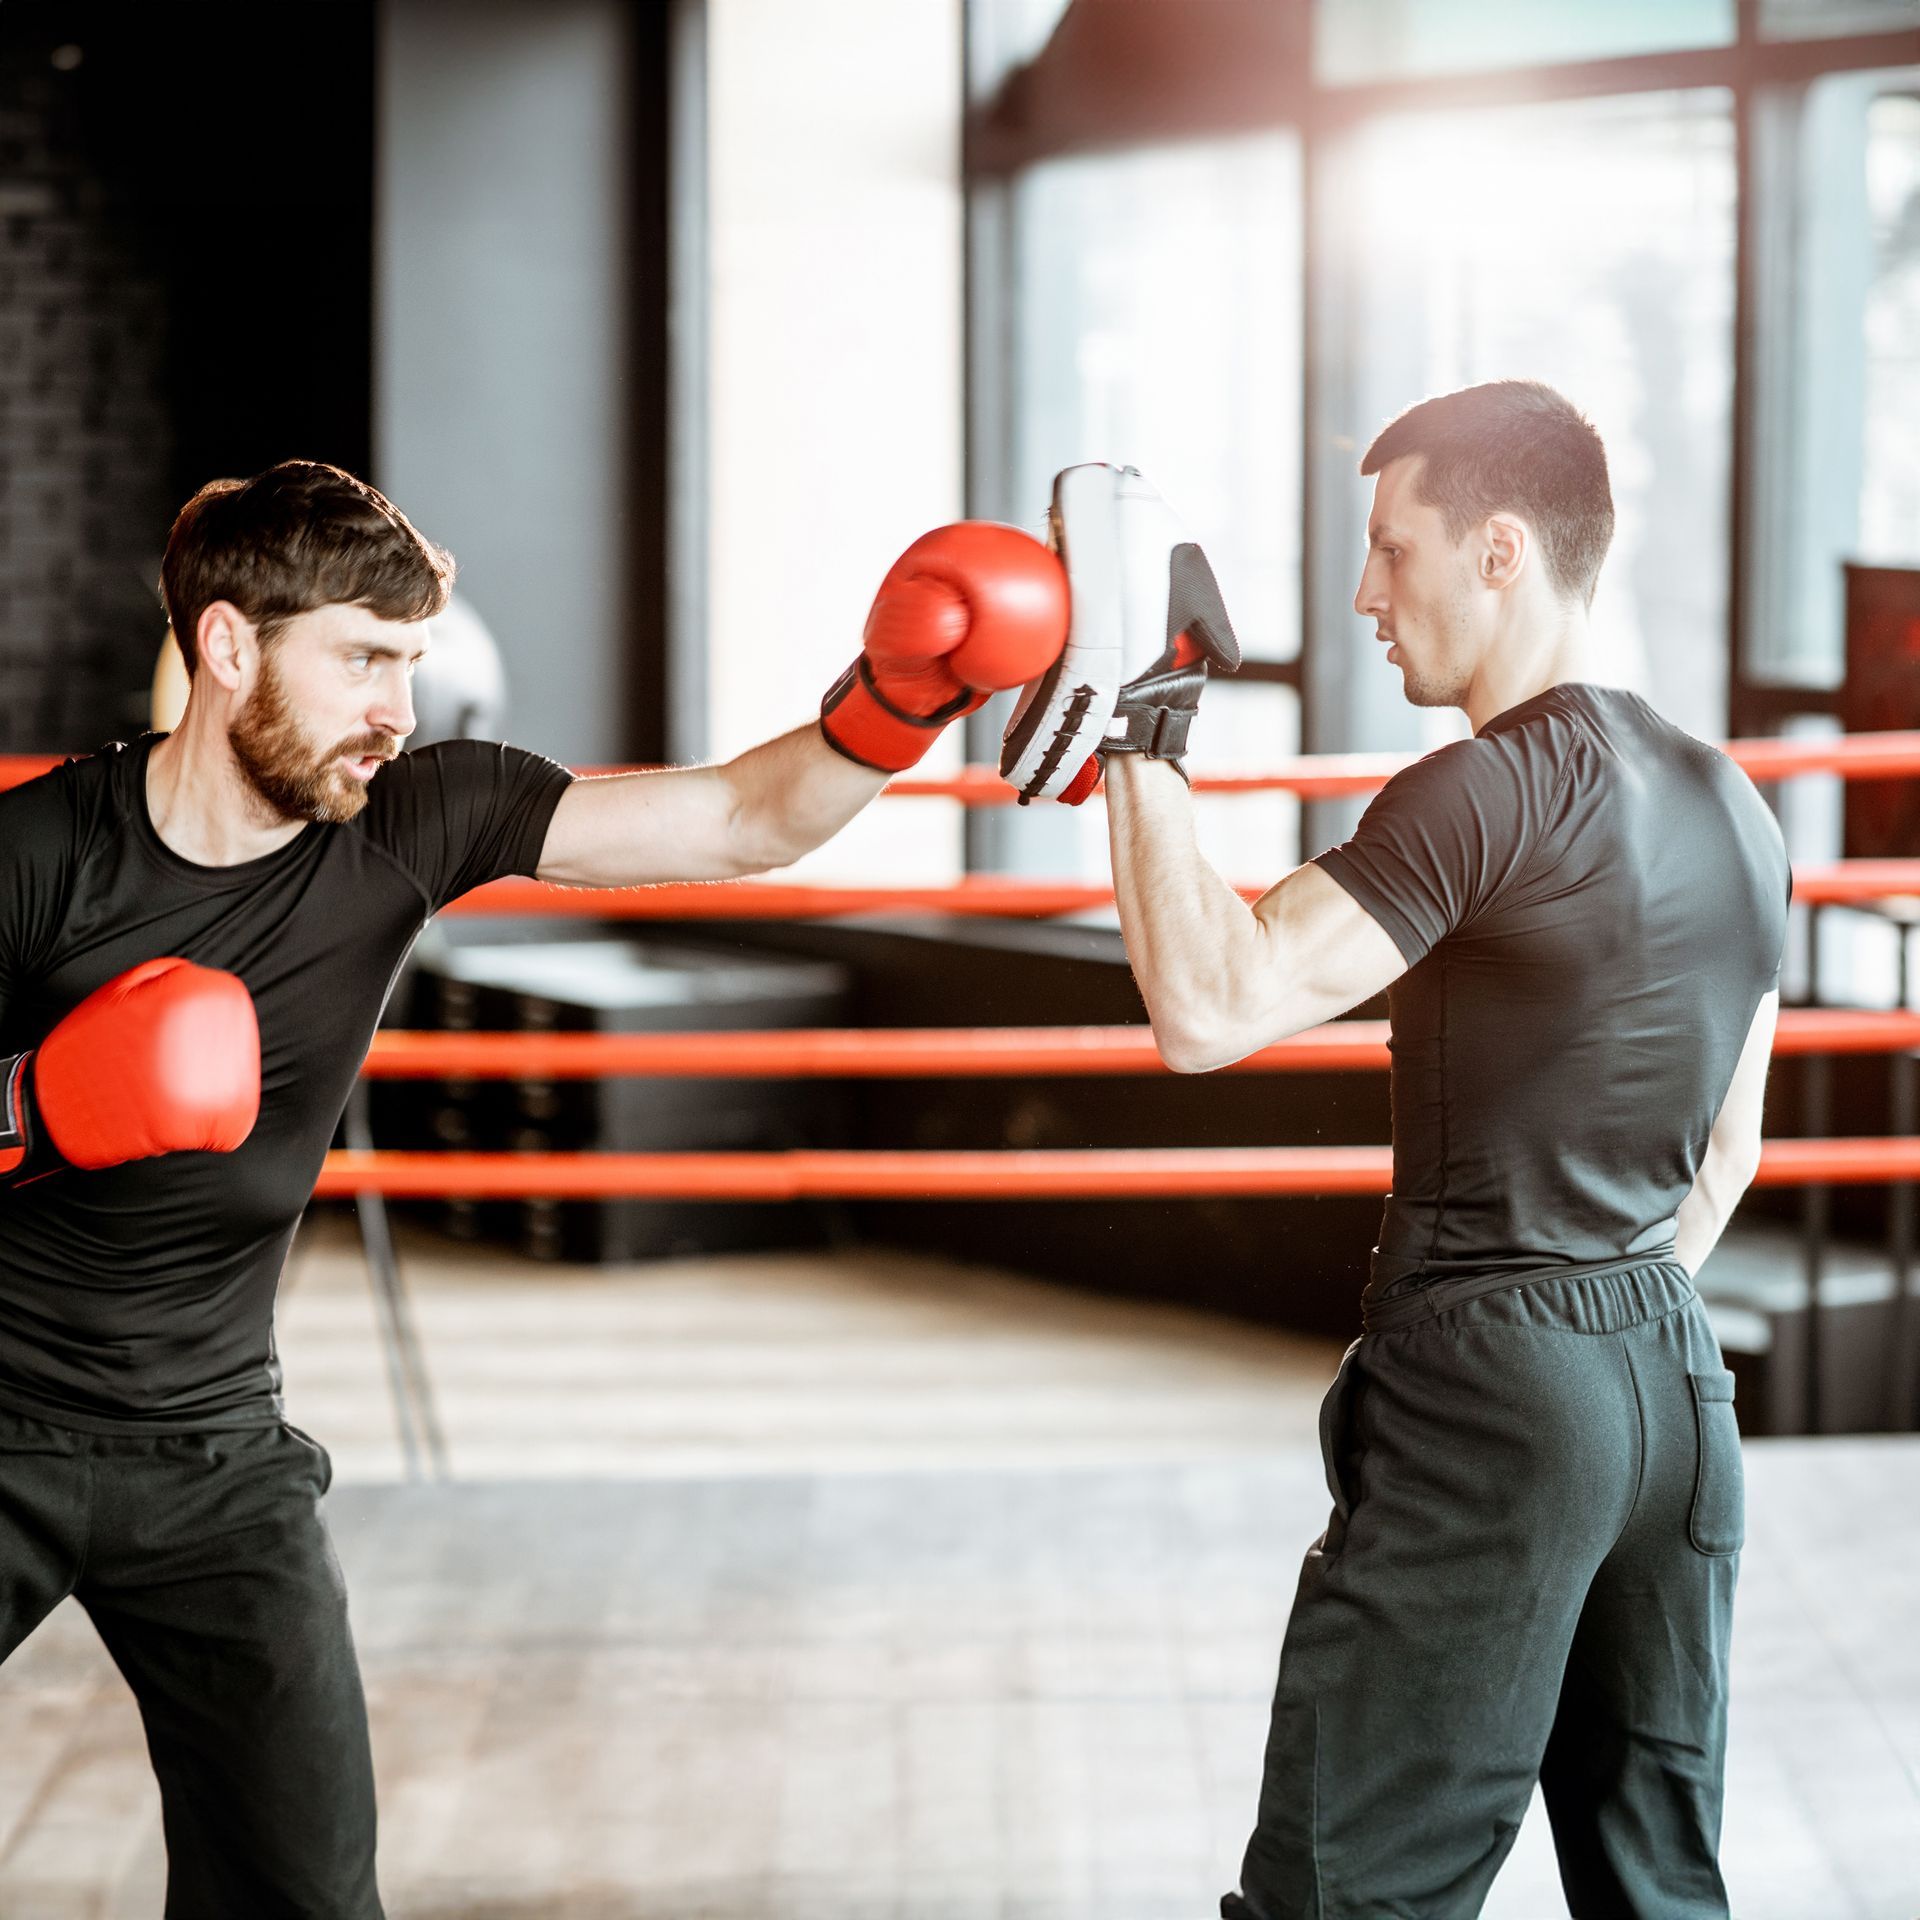 two men wearing red boxing gloves are sparring in a gym